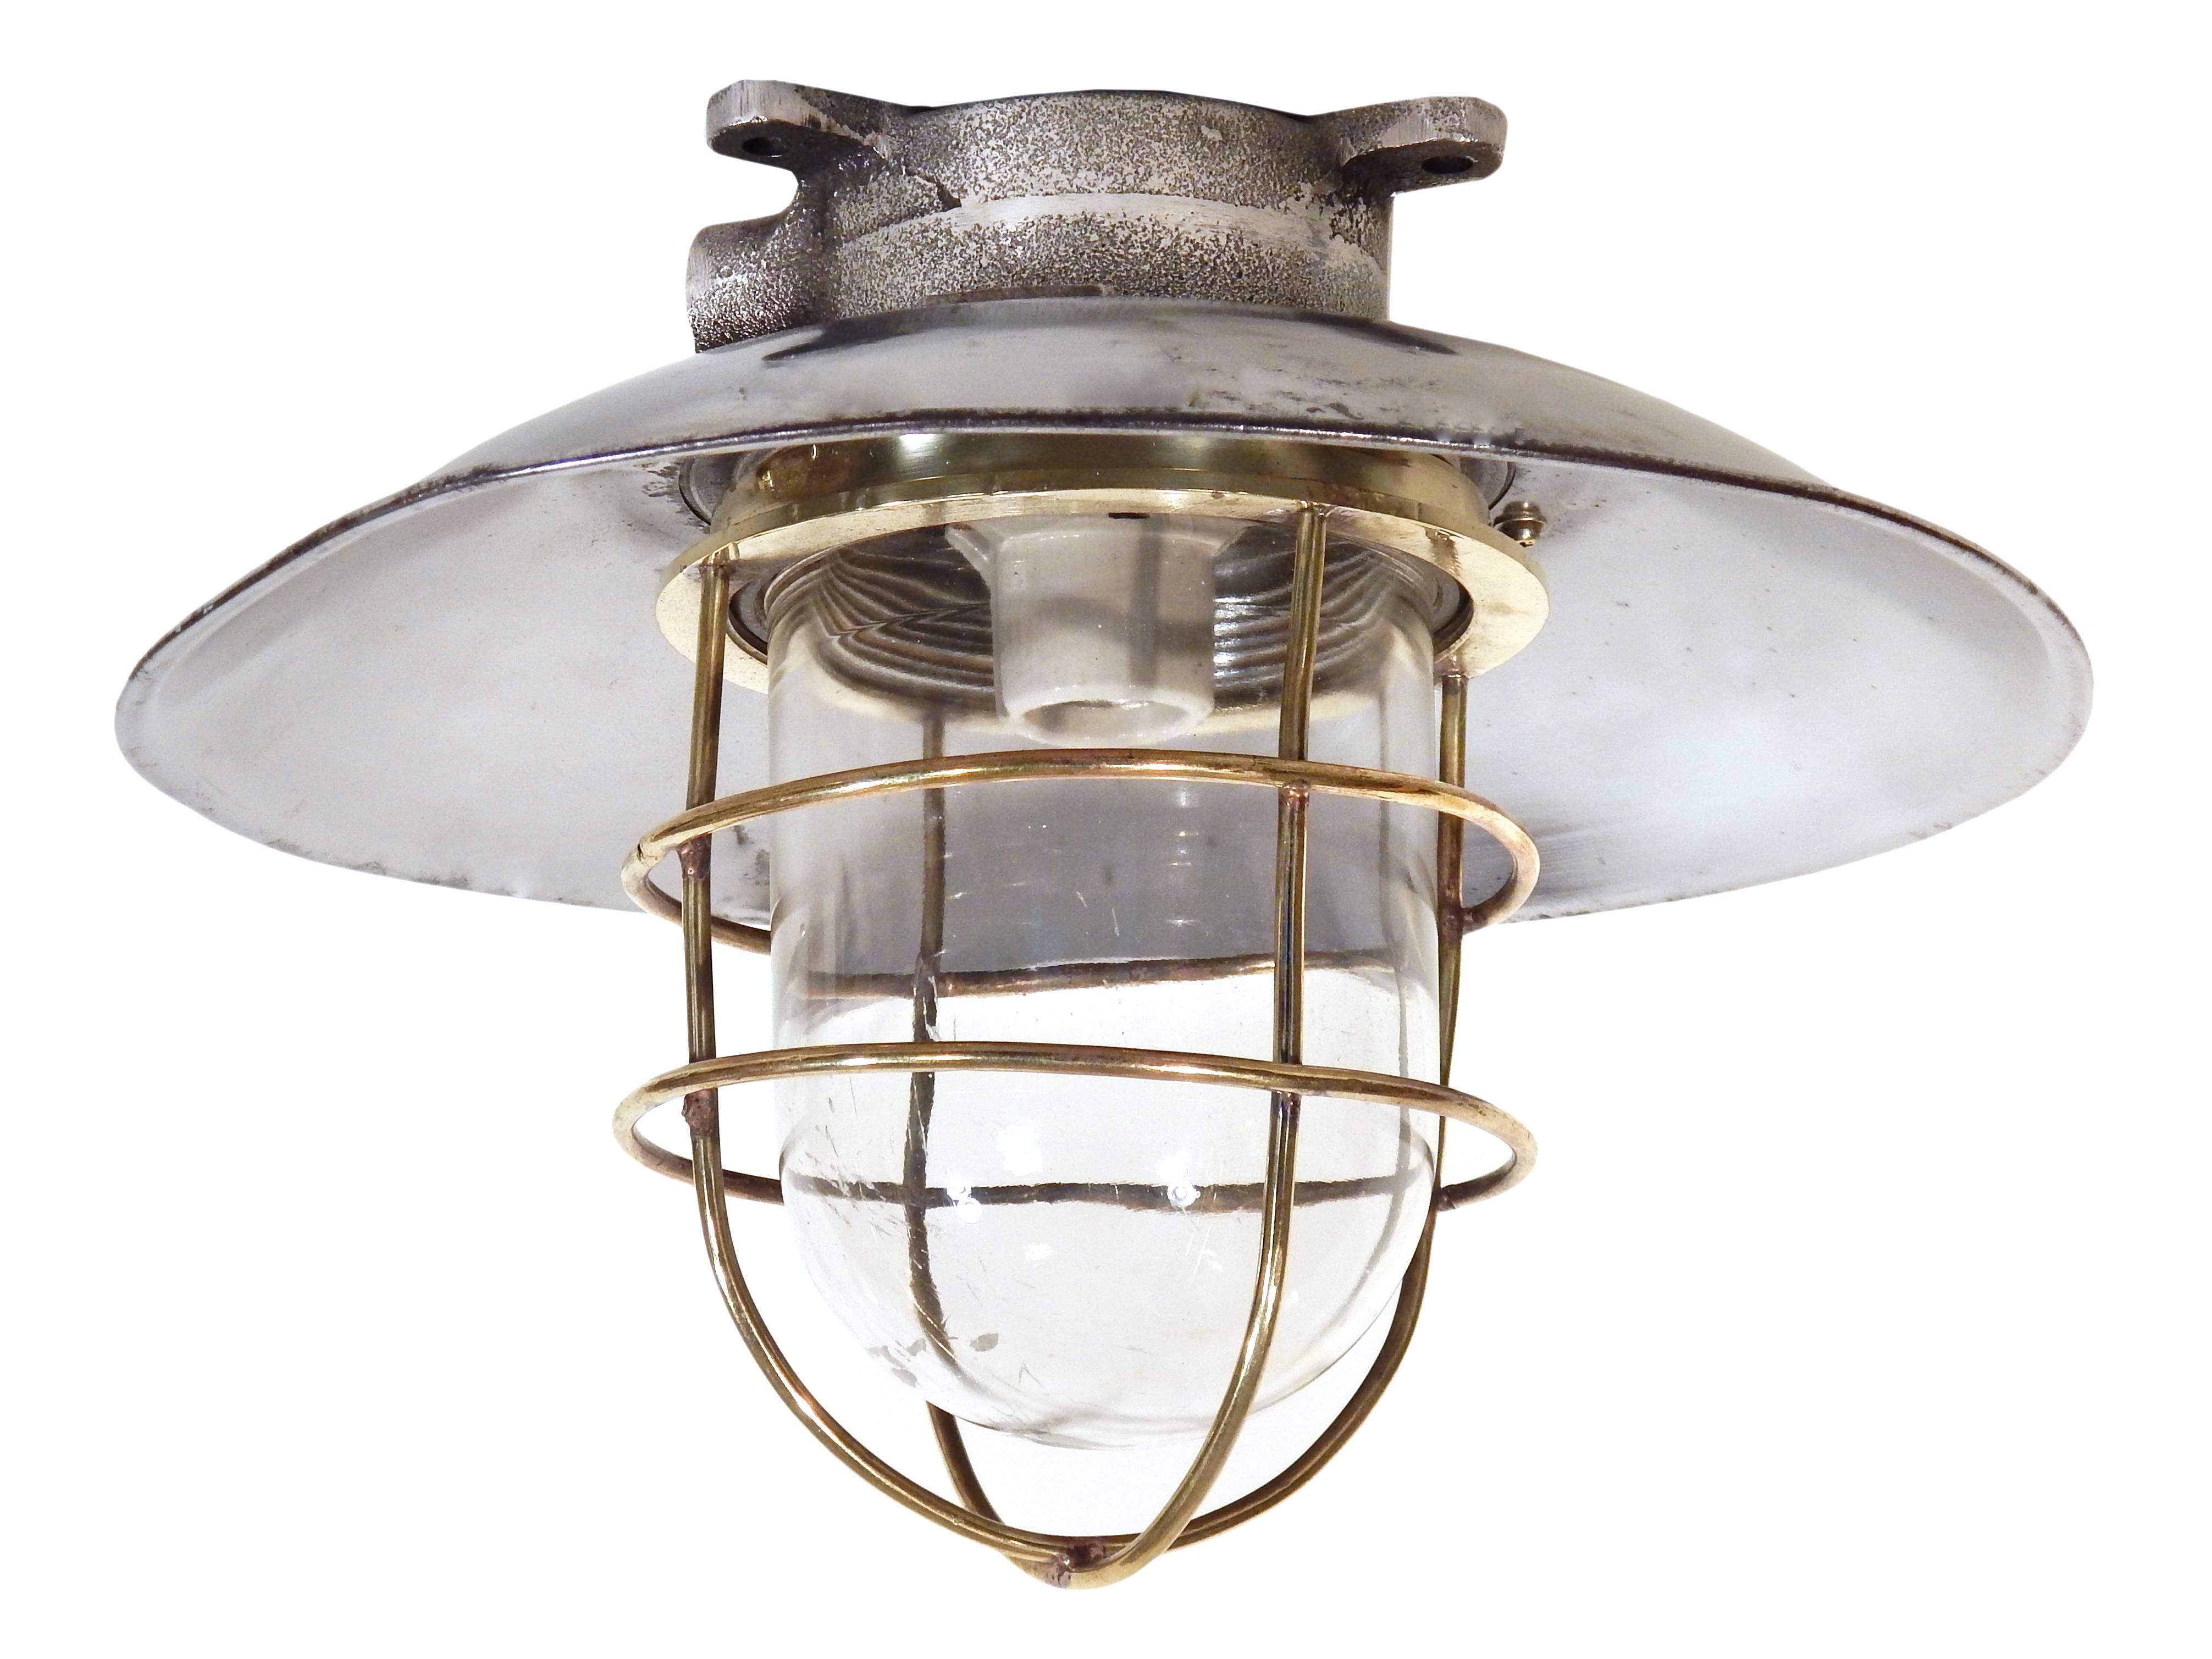 Nautical steel ceiling fixtures with brass cage and aluminum shade, priced individually.